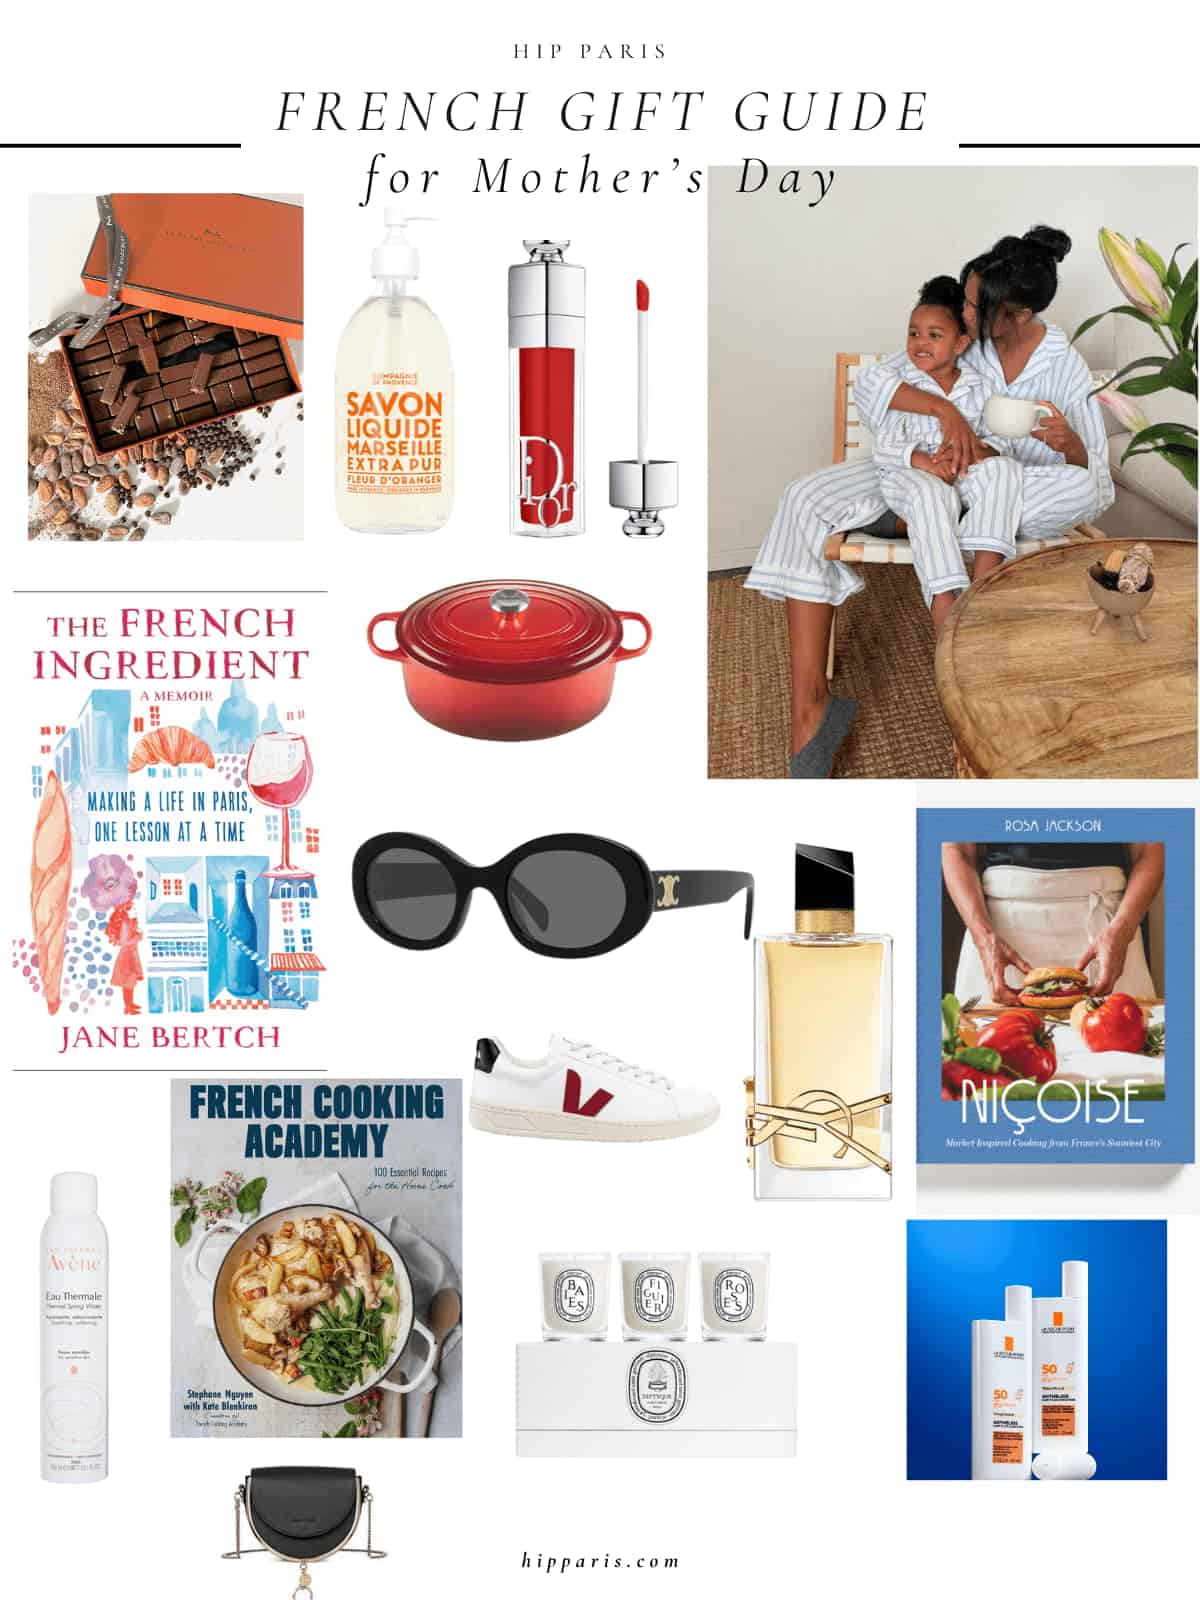 A collage of last minute gifts for Mother's Day hand picked by HIP Paris editors.